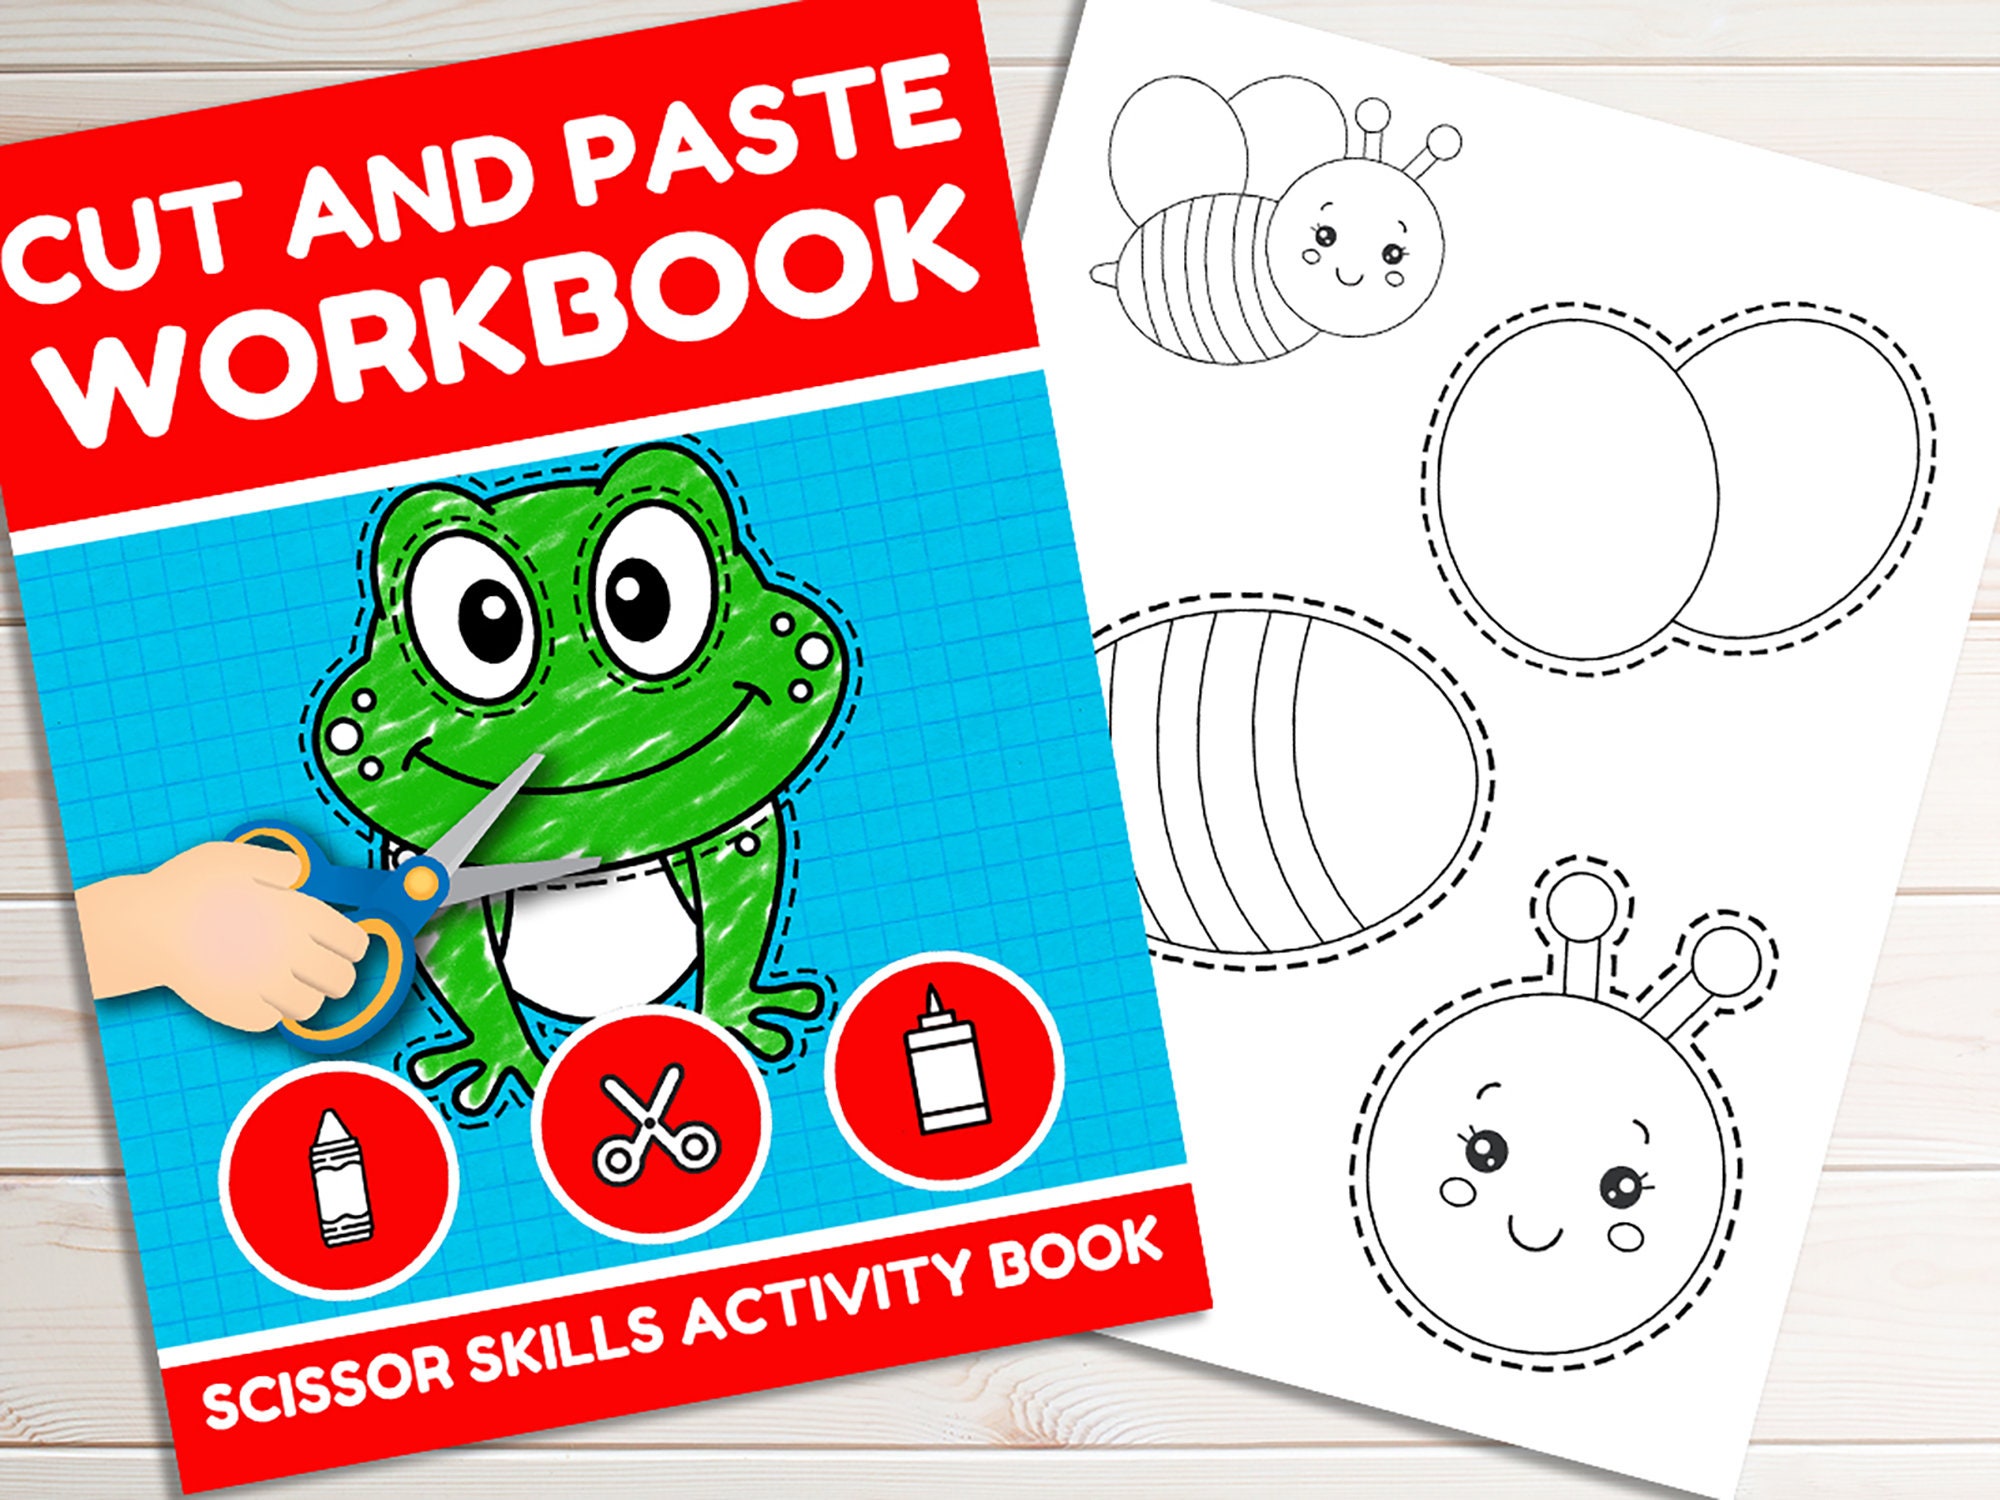 The Big Preschool Cutting Practice Workbook | Basic Scissor Skills for Toddlers and Kids: Activity Book with Shapes, Cute Animals, and Space for